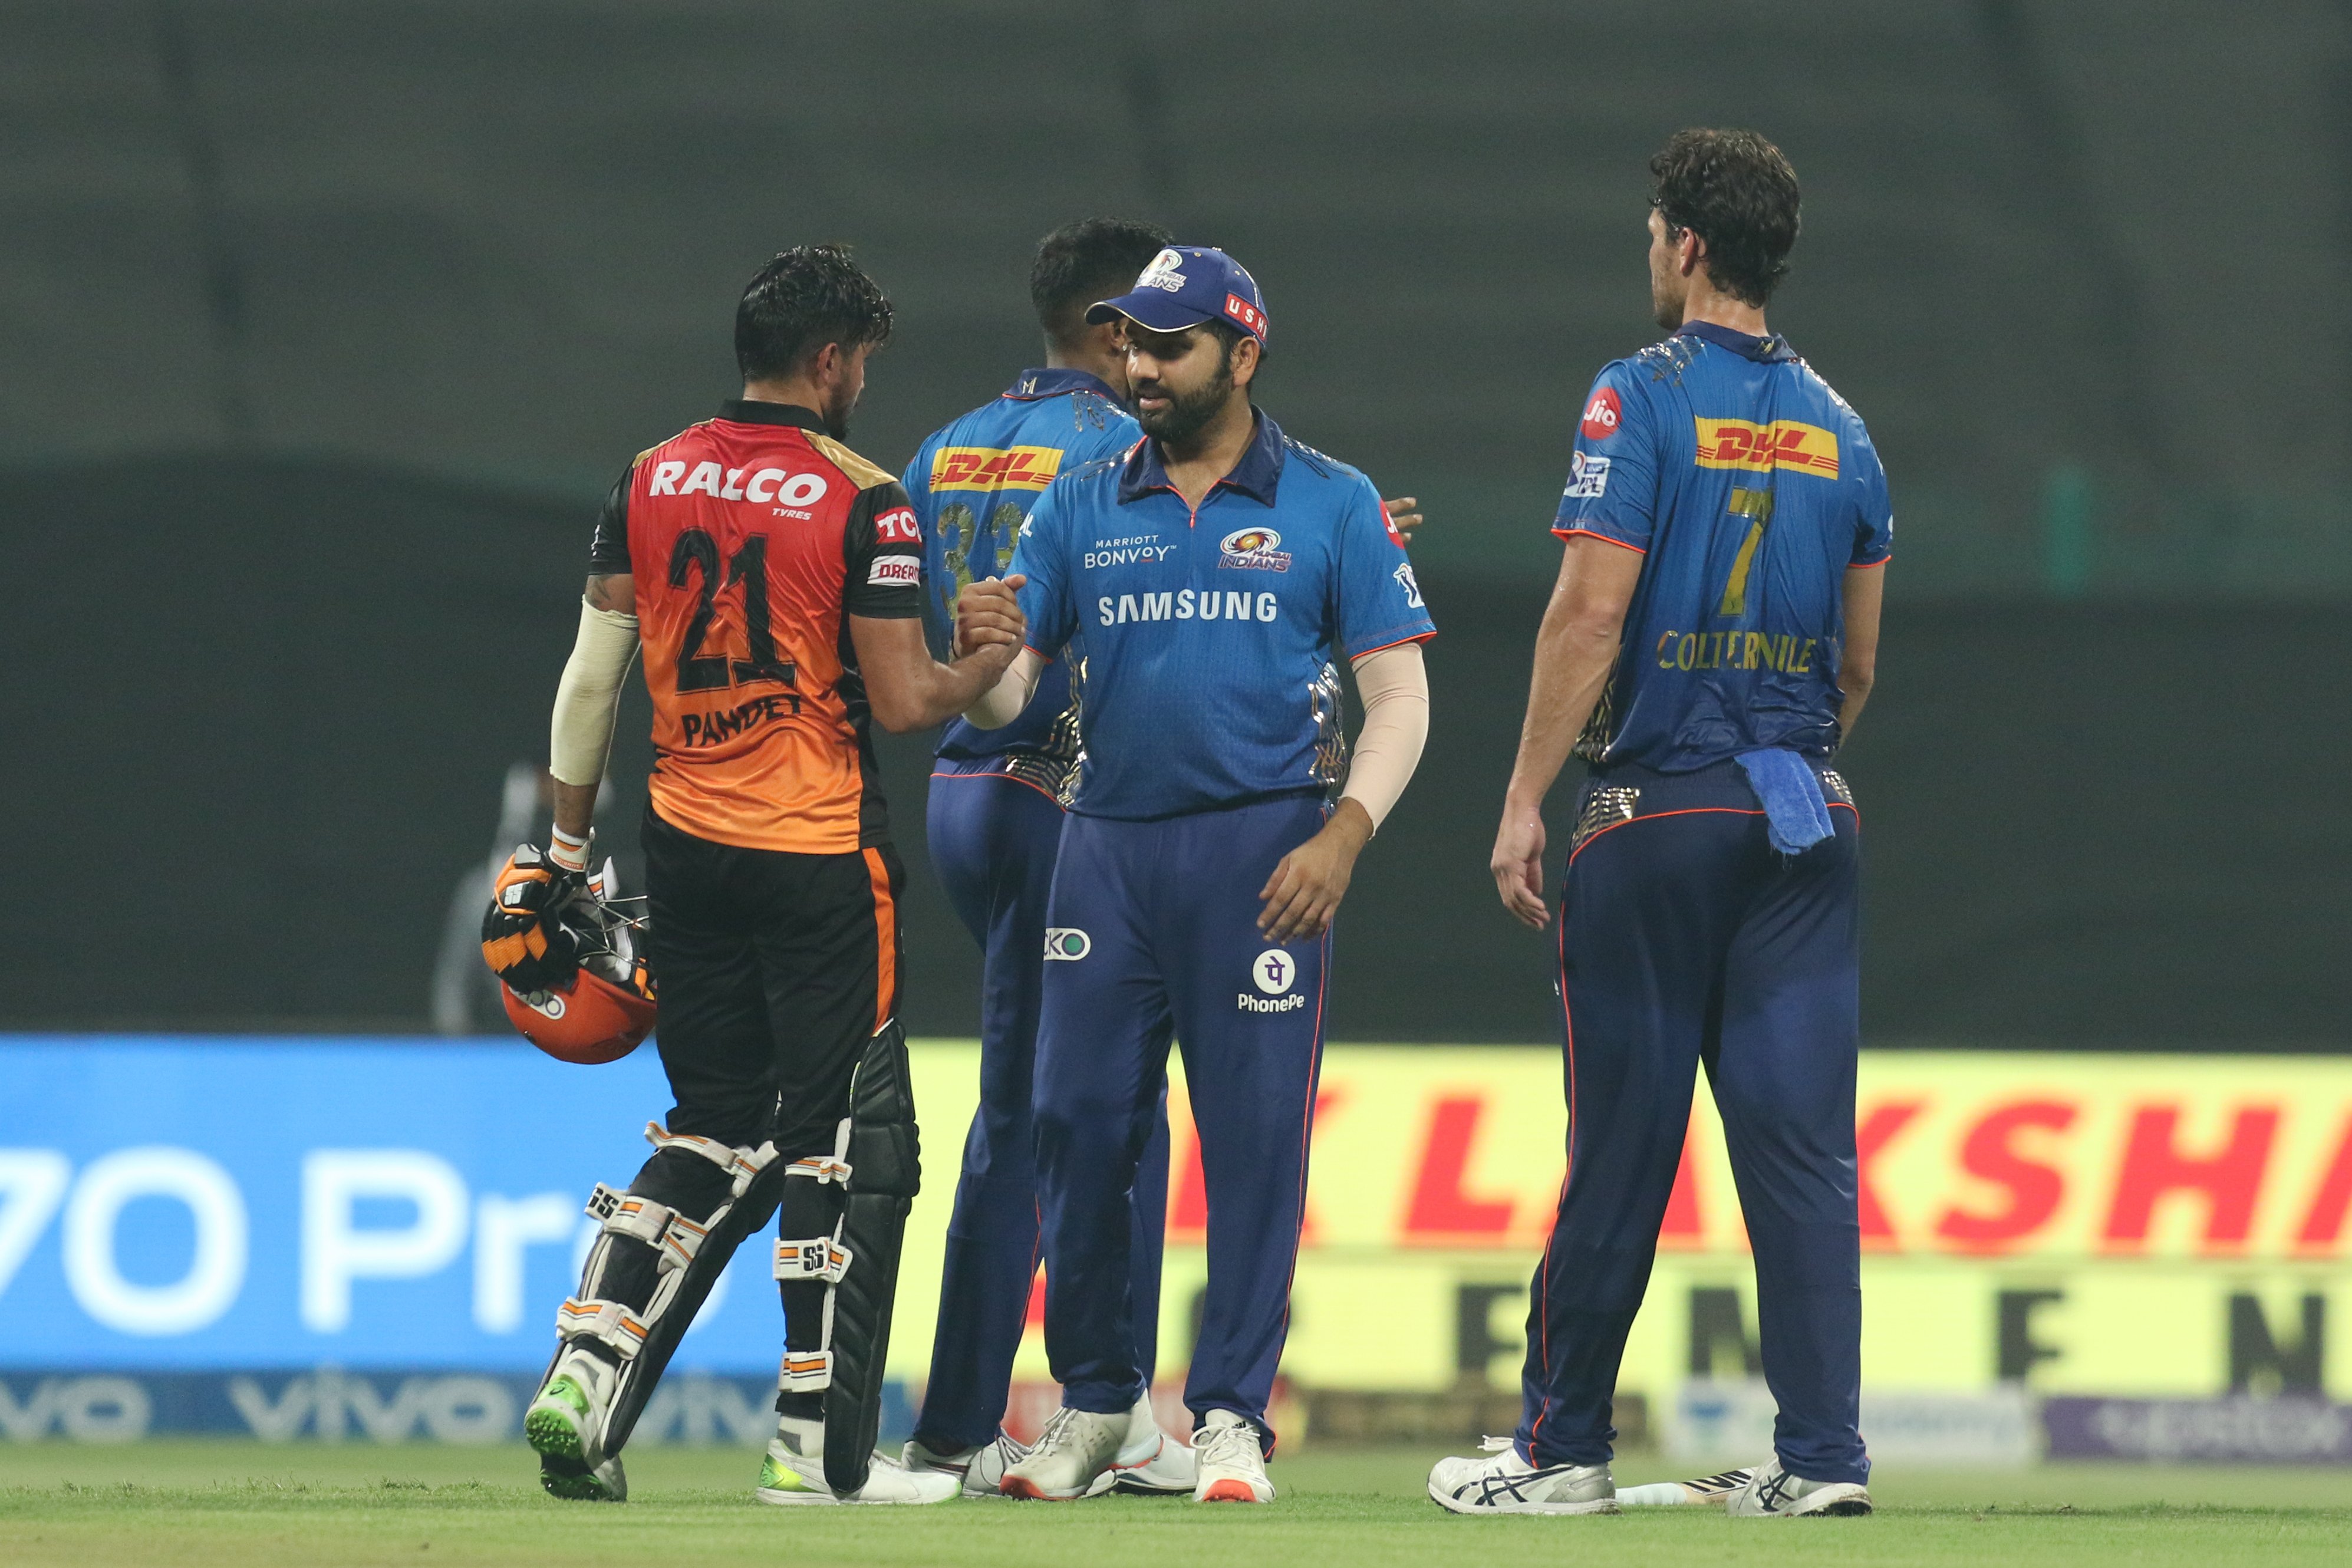 MI vs SRH | Collective failure of group, admits Rohit Sharma as Mumbai Indians' IPL 2021 campaign ends 